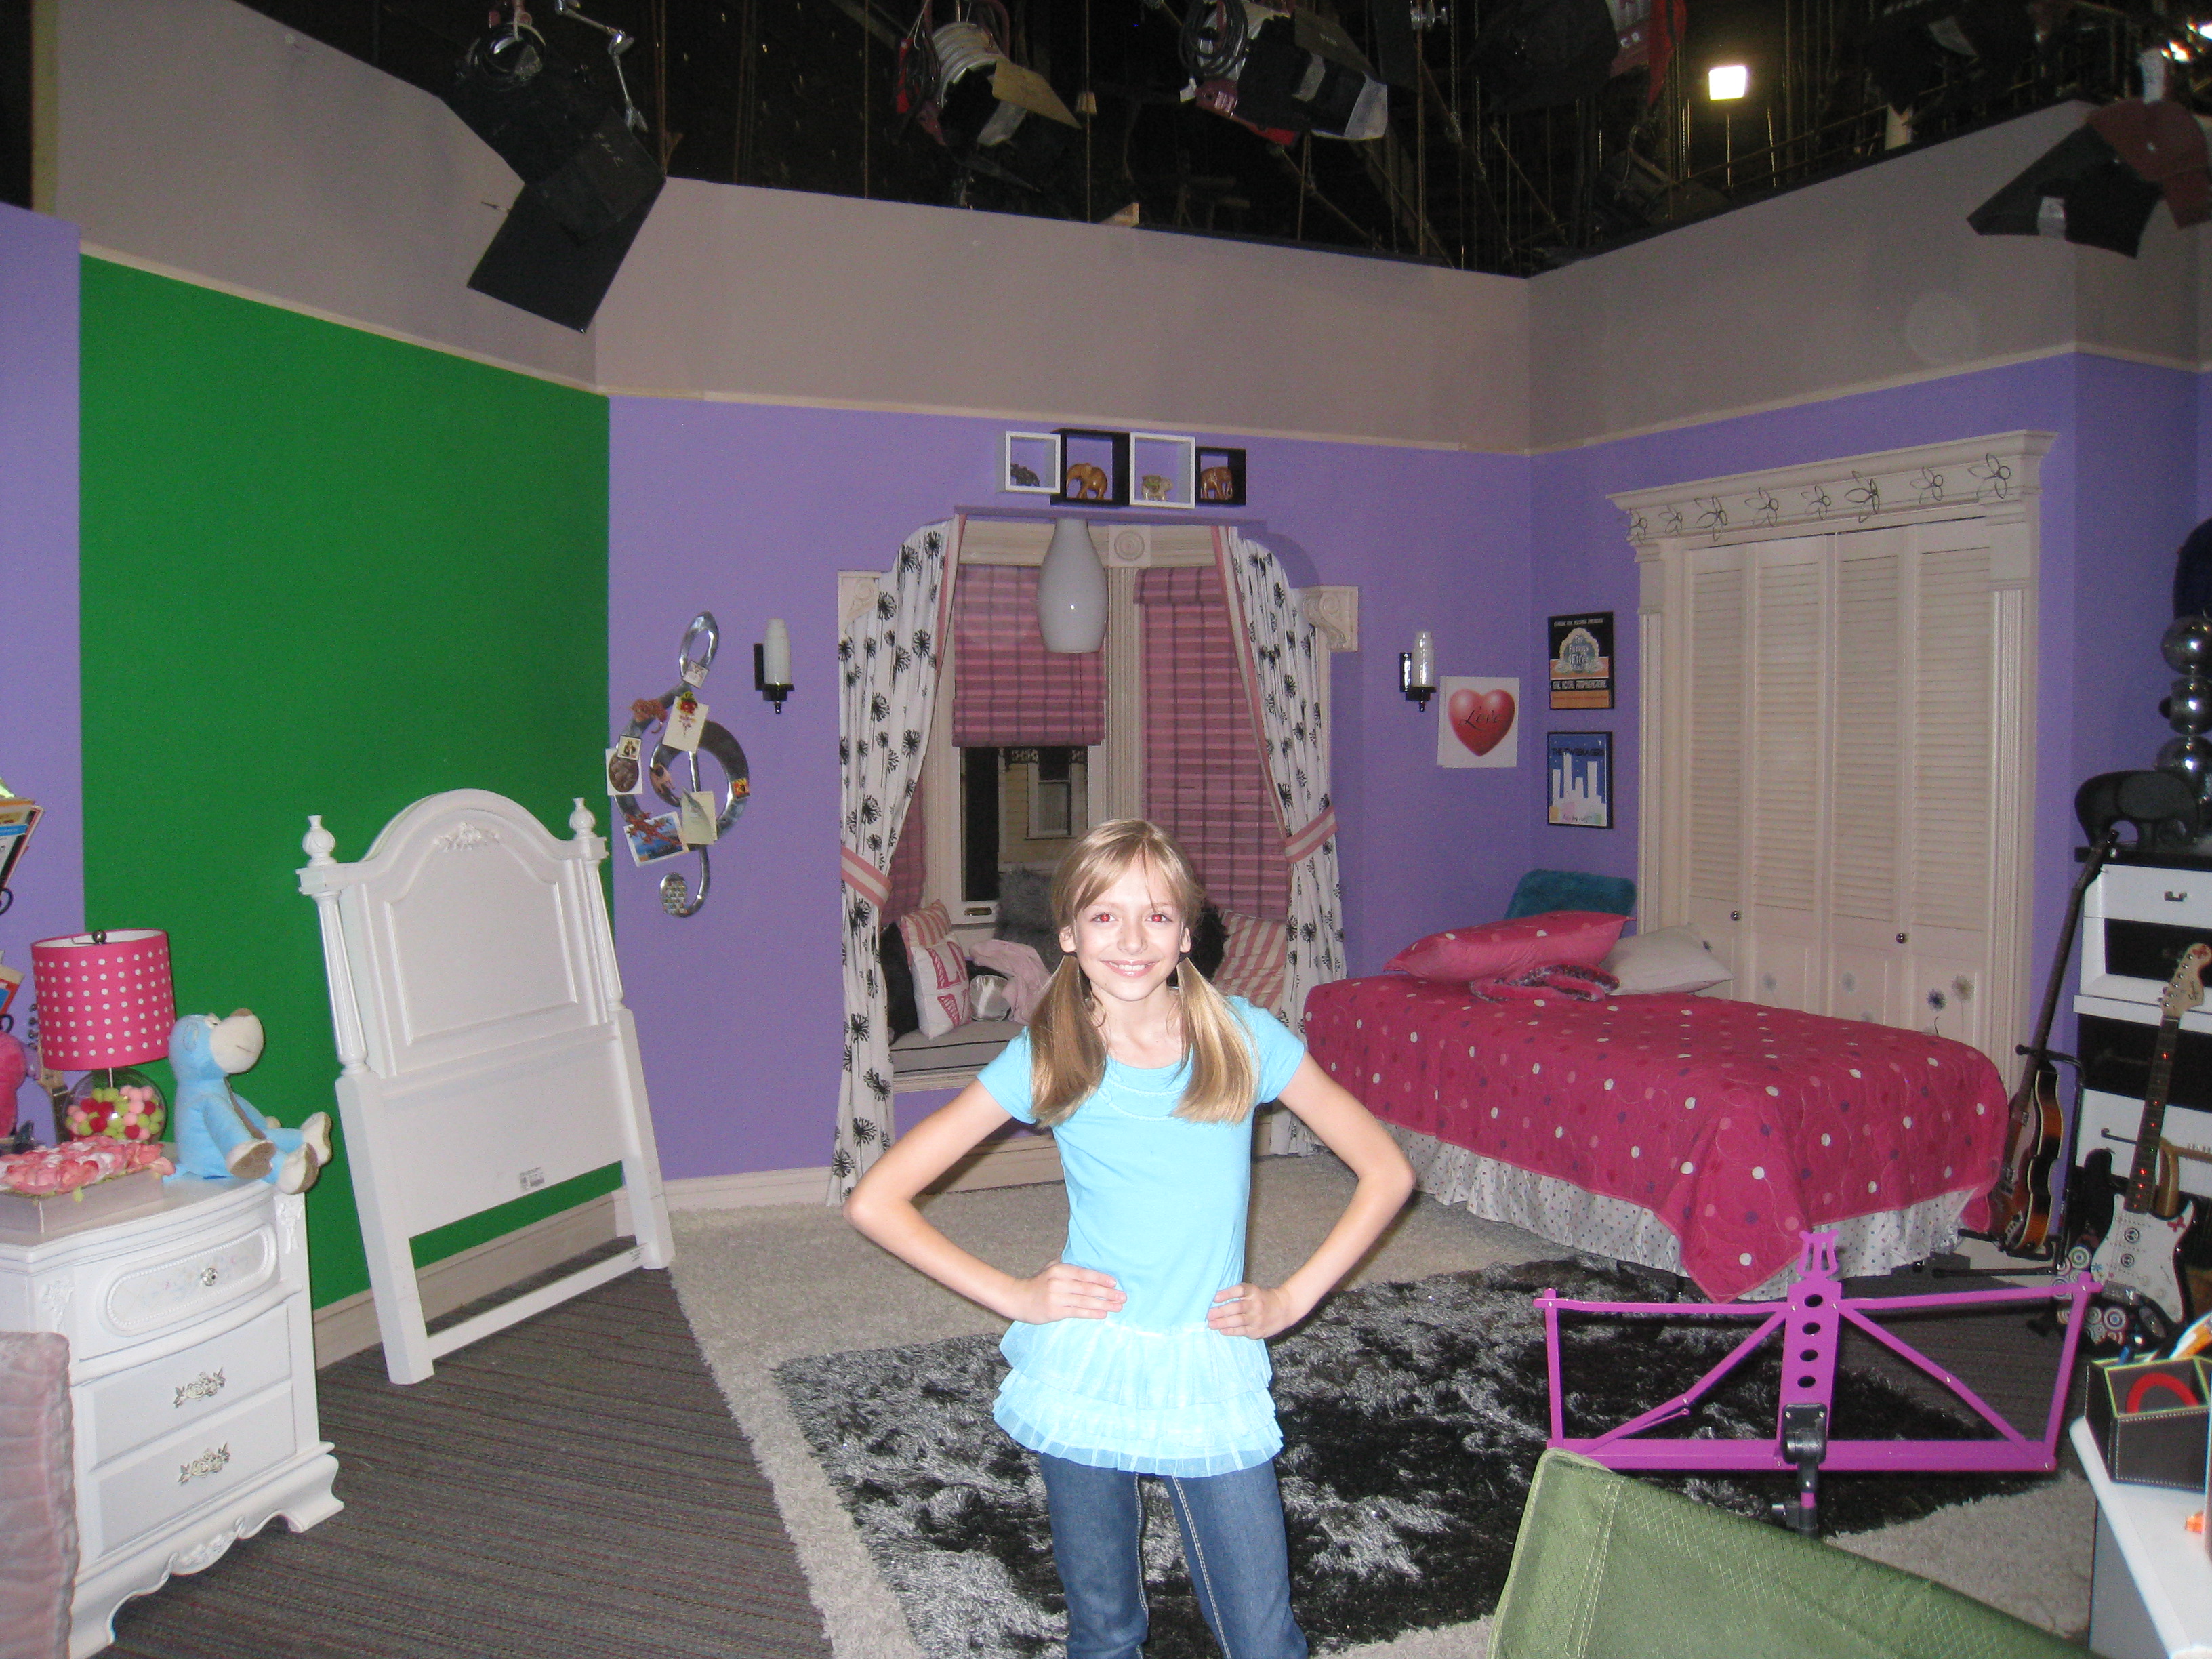 On the set of Ant Farm